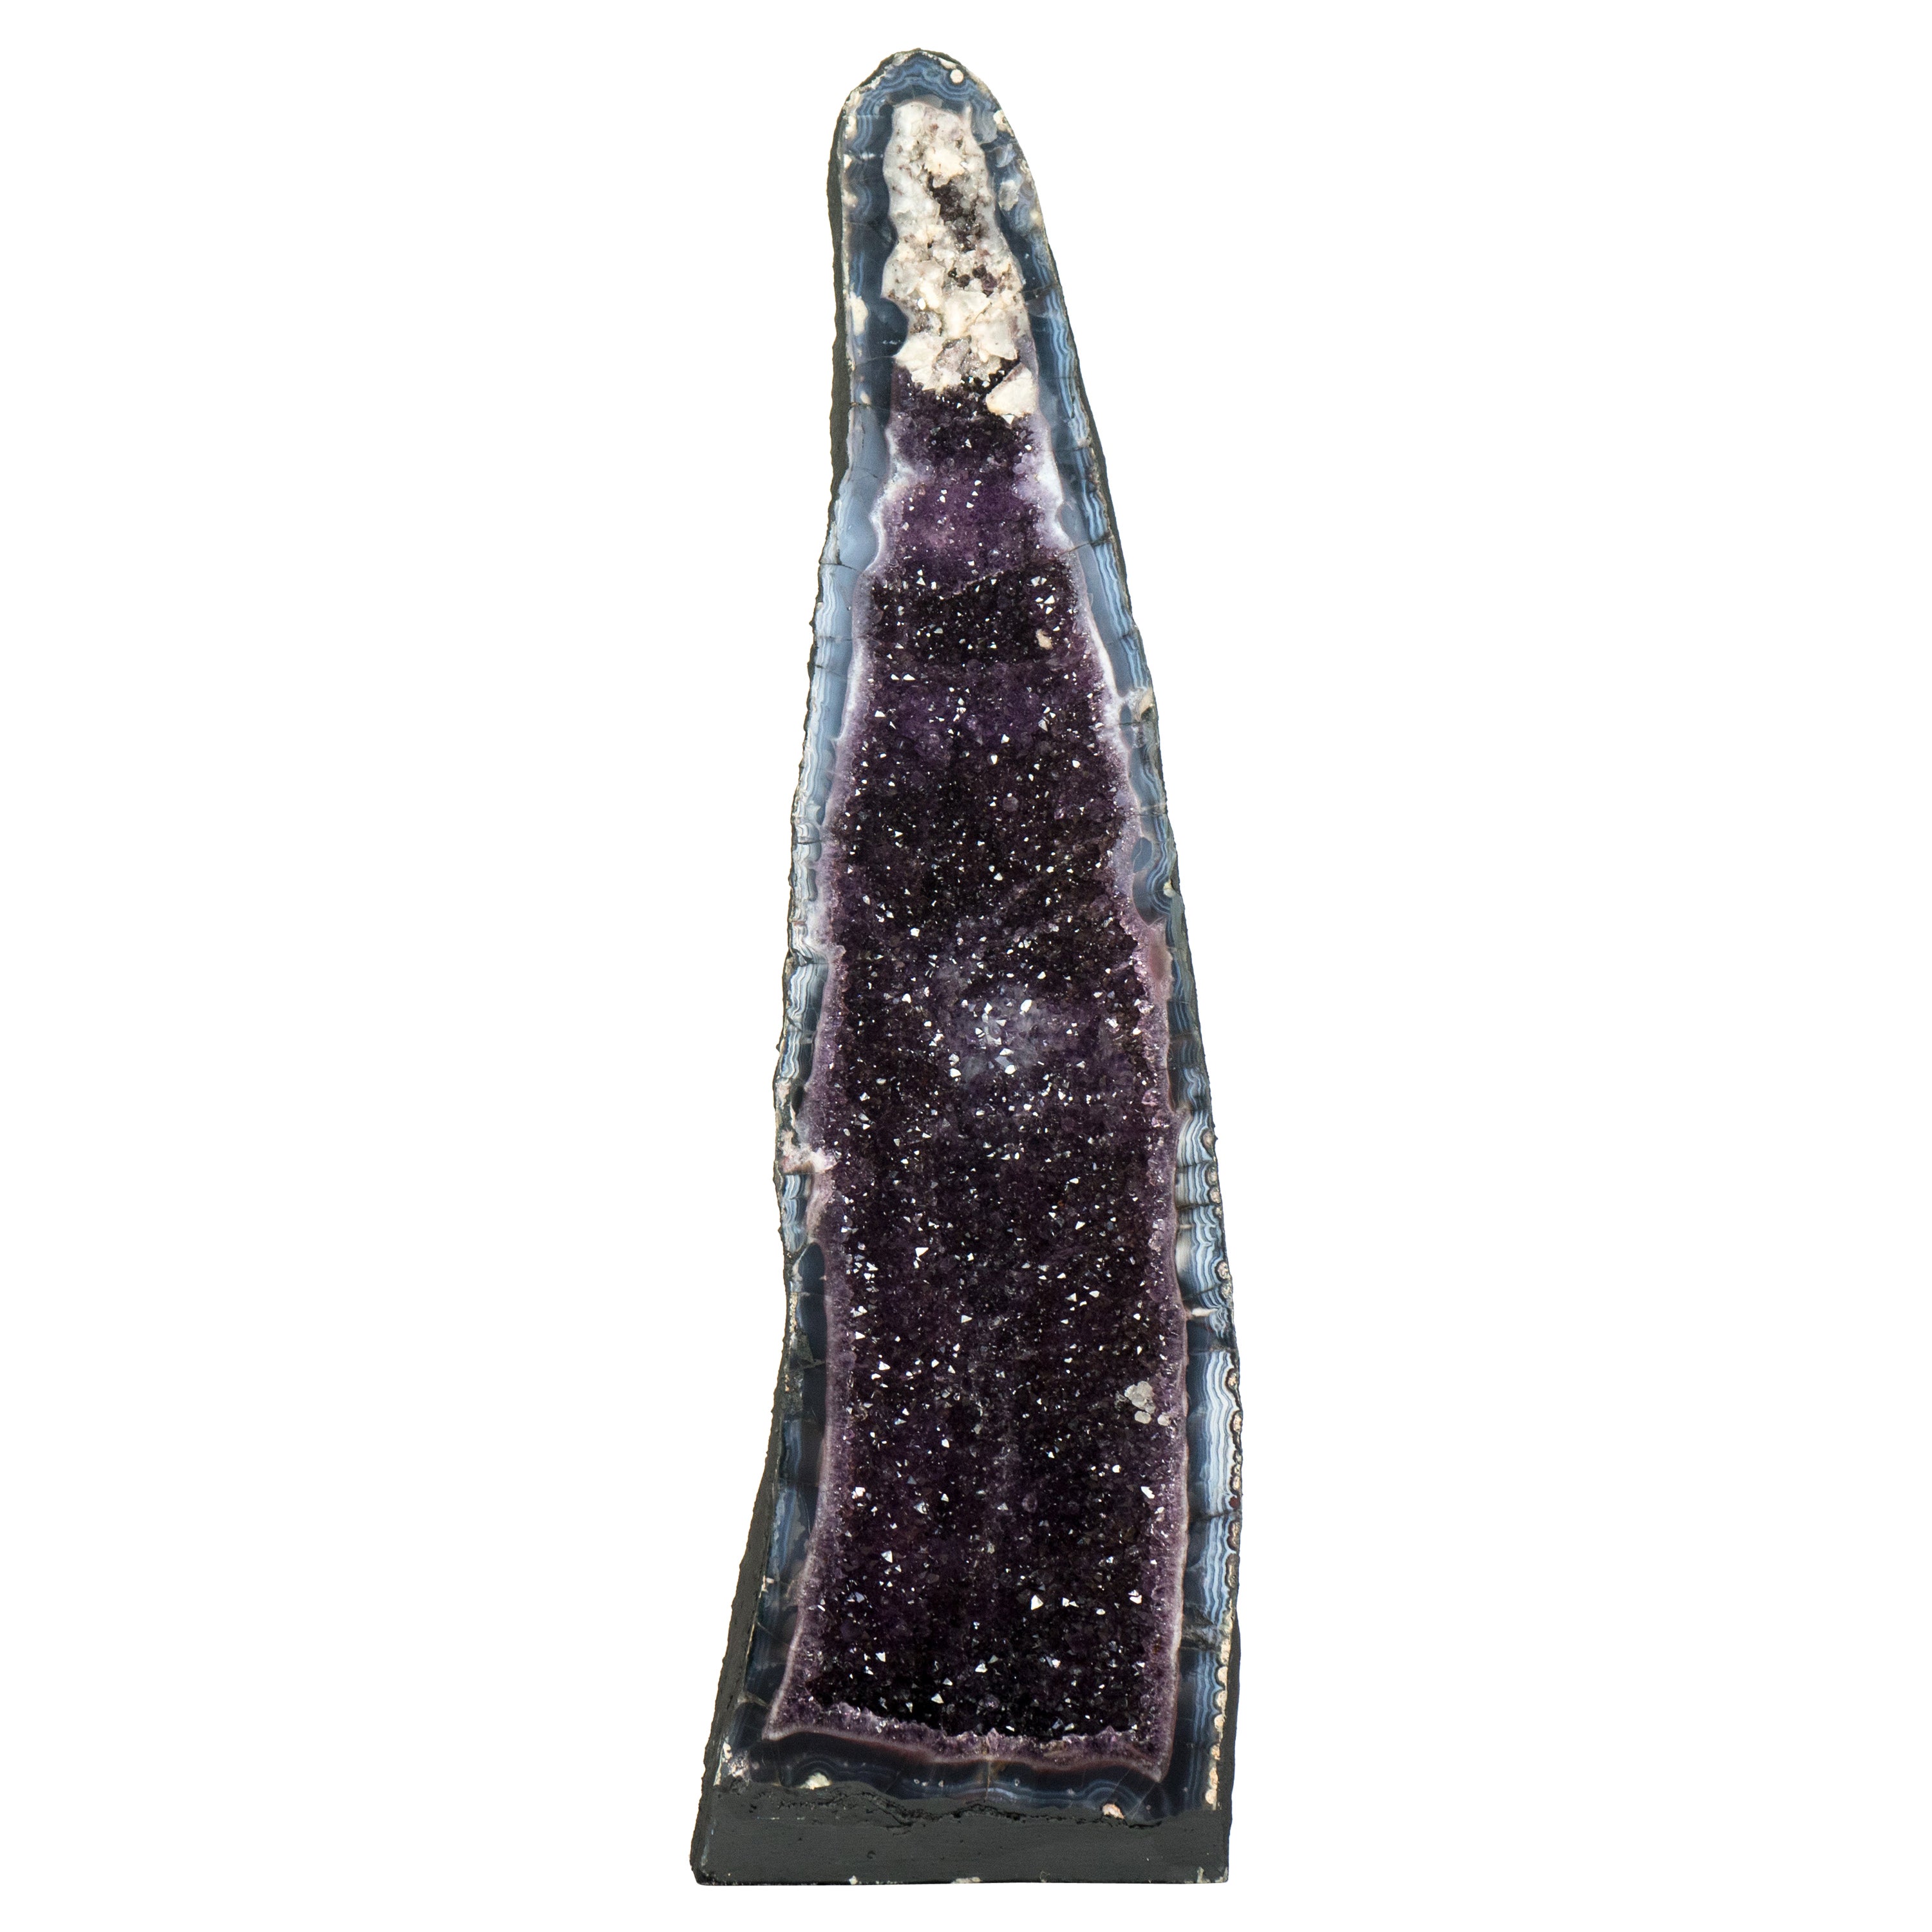 Tall Amethyst Cathedral Geode, with Lace Agate, Purple Amethyst and Calcite